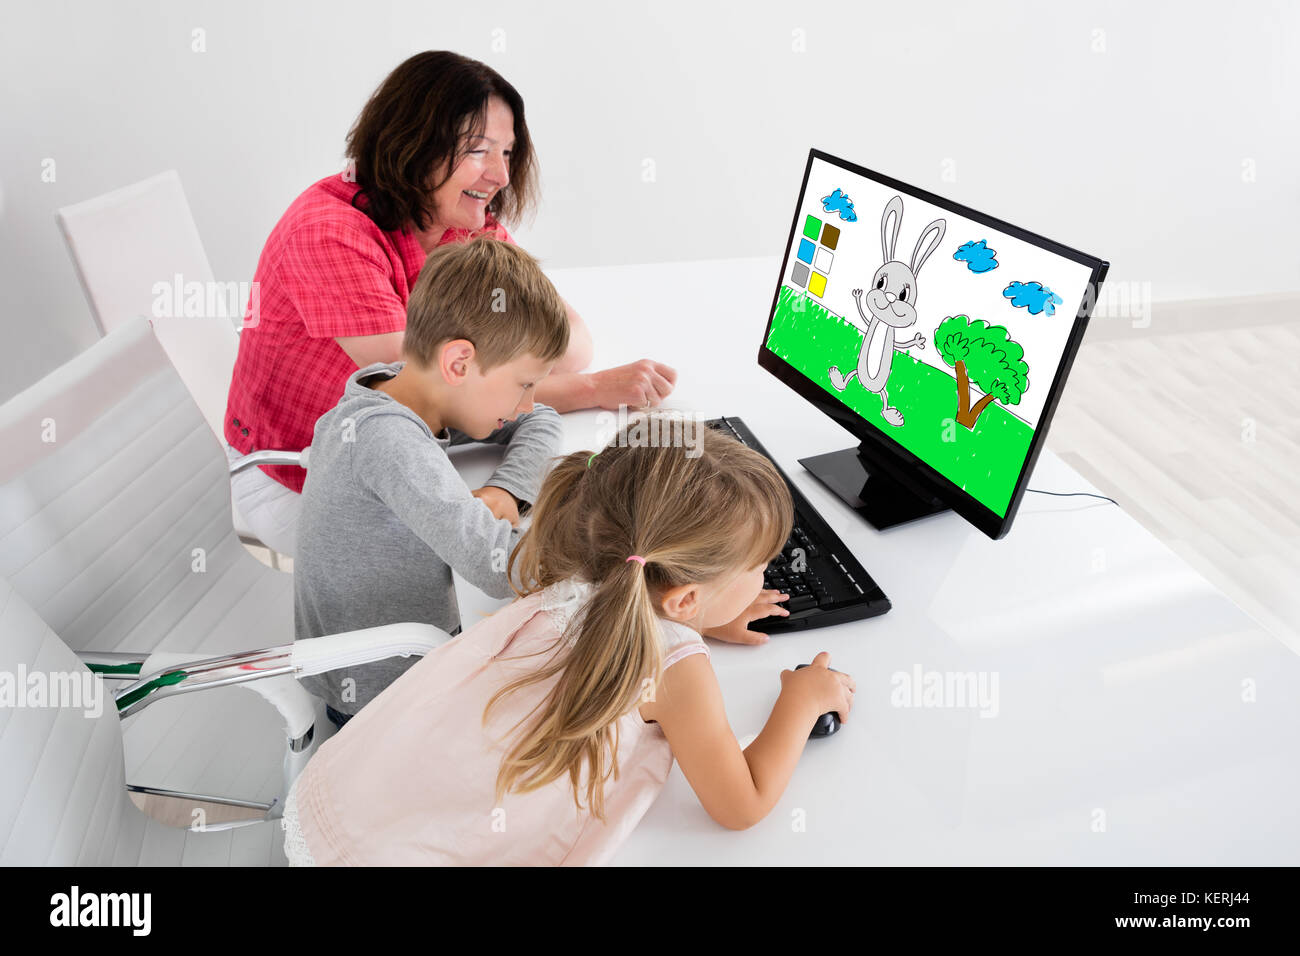 Happy Kids Using Painting Application On Desktop Computer Together With